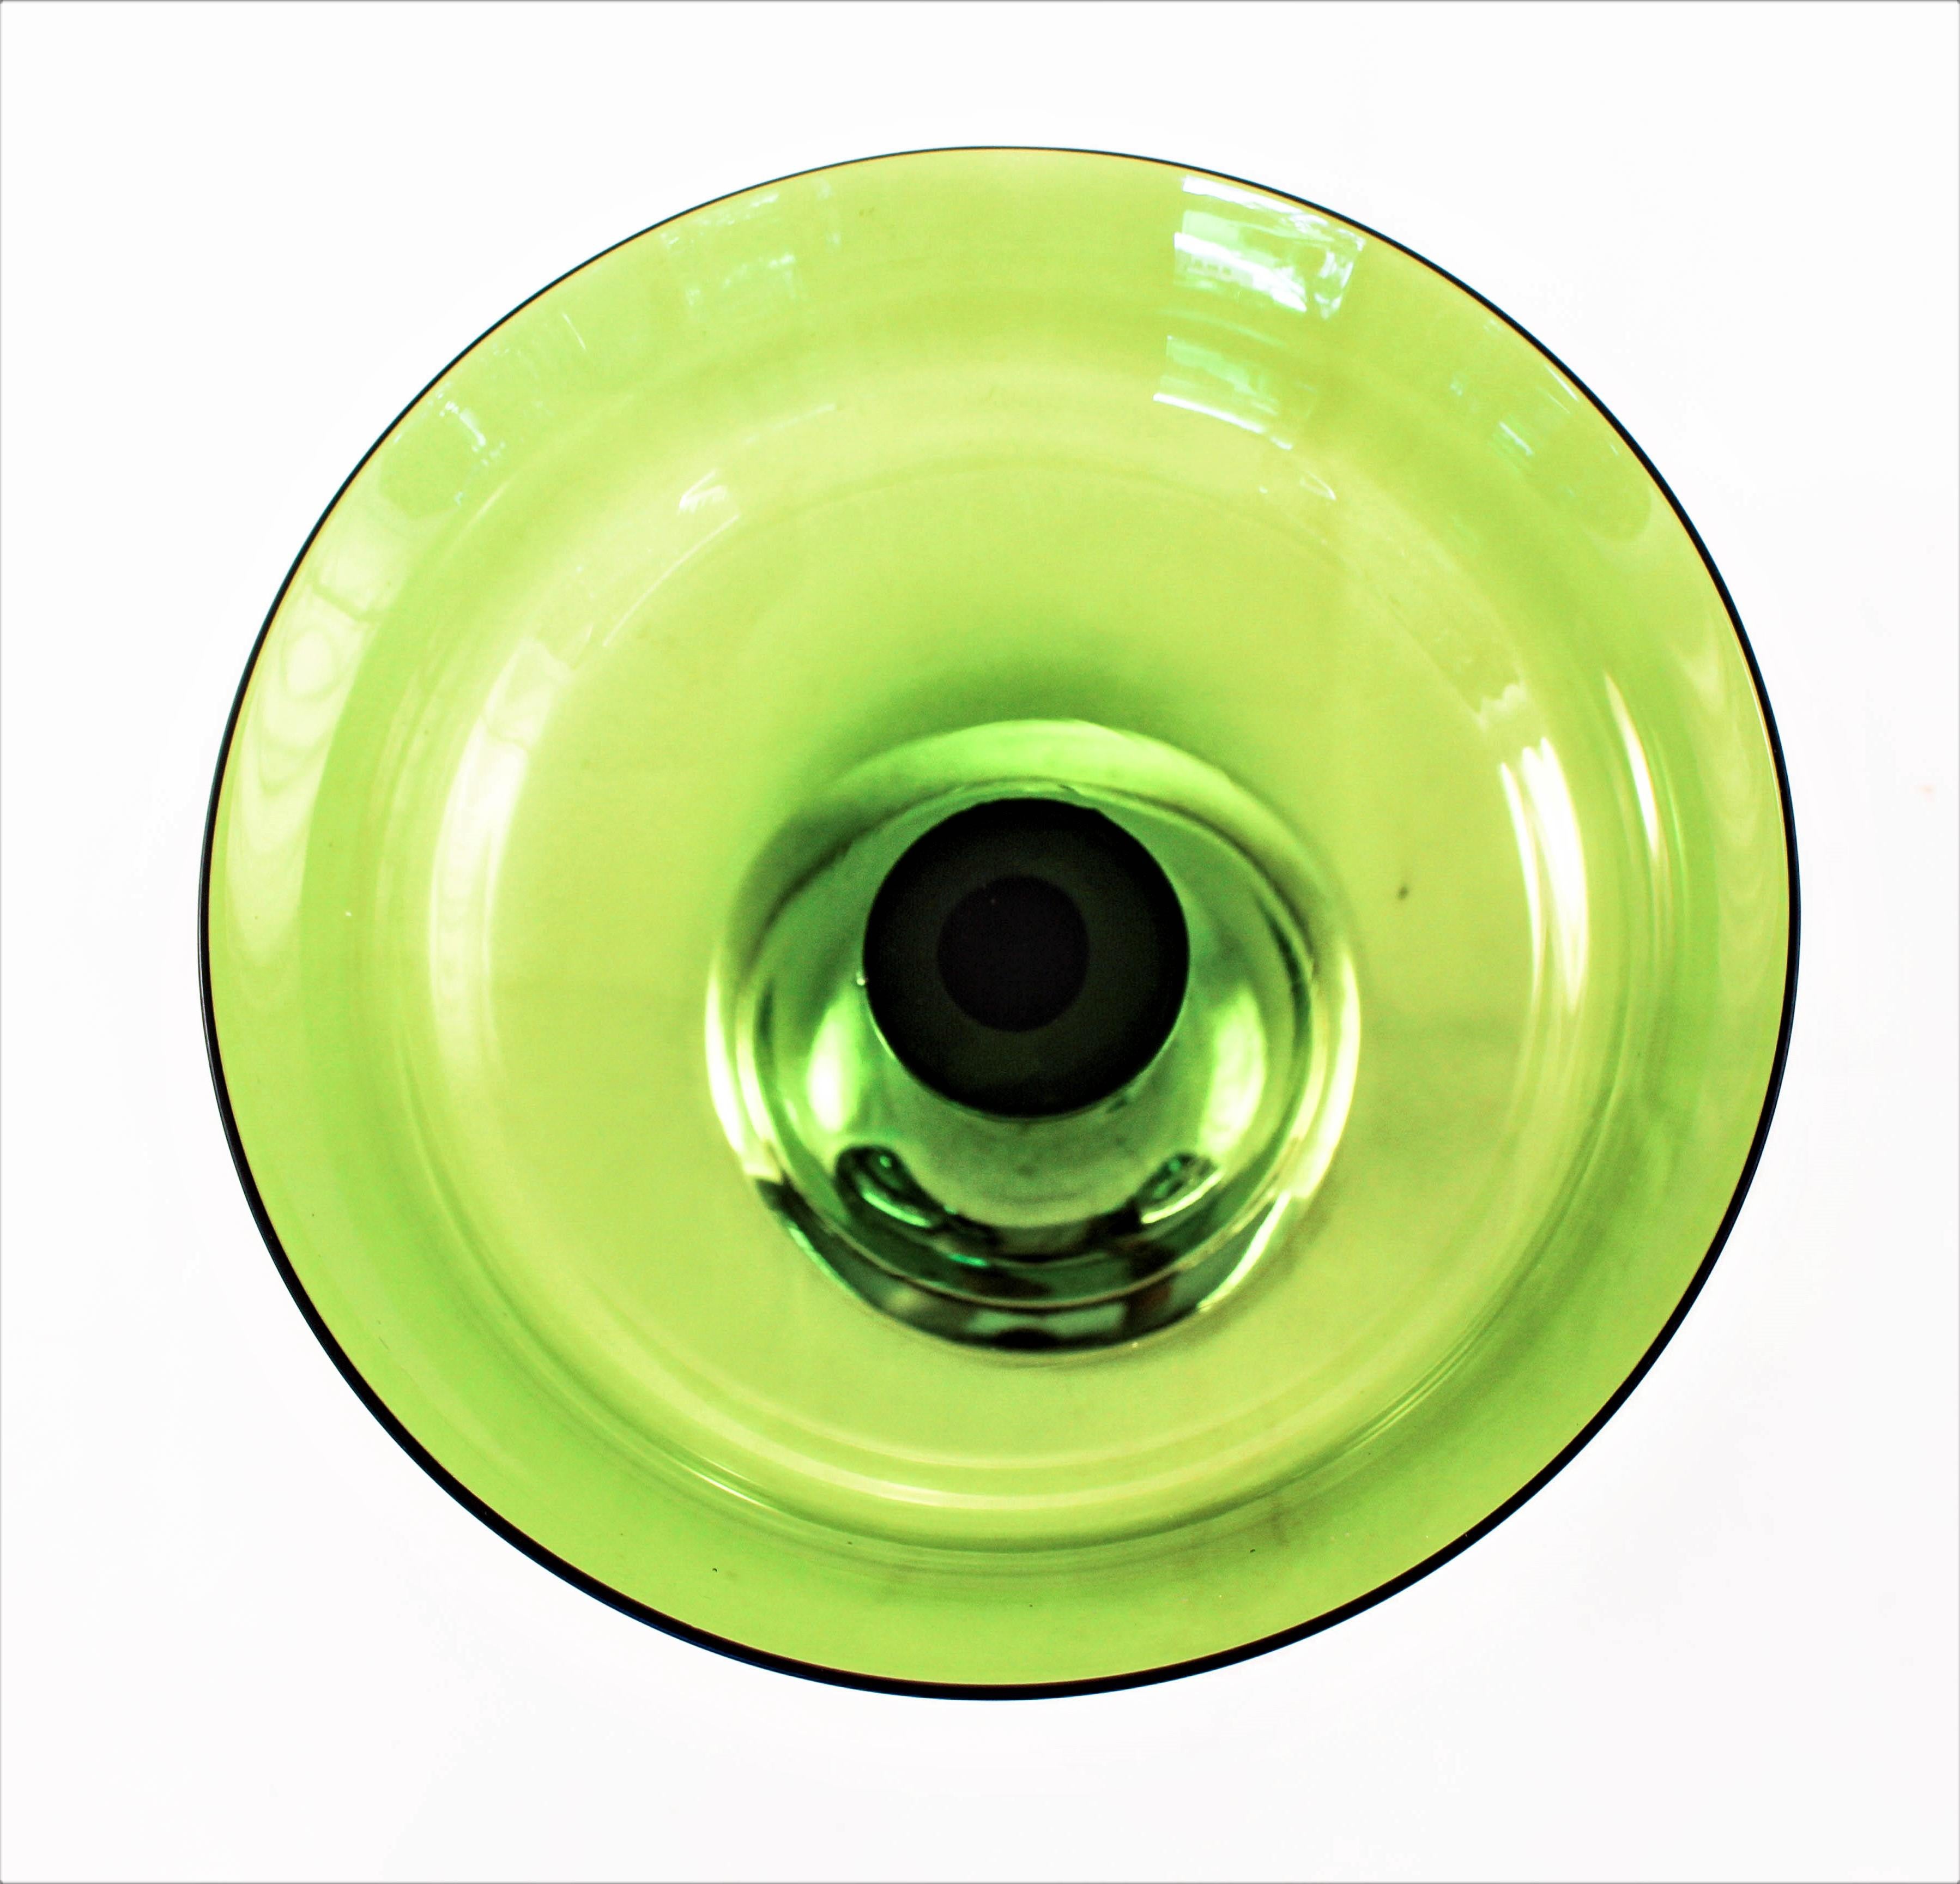 If you are like me, you love color strong vibrant colors. Colors that give your room and home style and an individuality that is distinctively your own. This compote has a sterling base and a crystal top. The color of the crystal, green is what